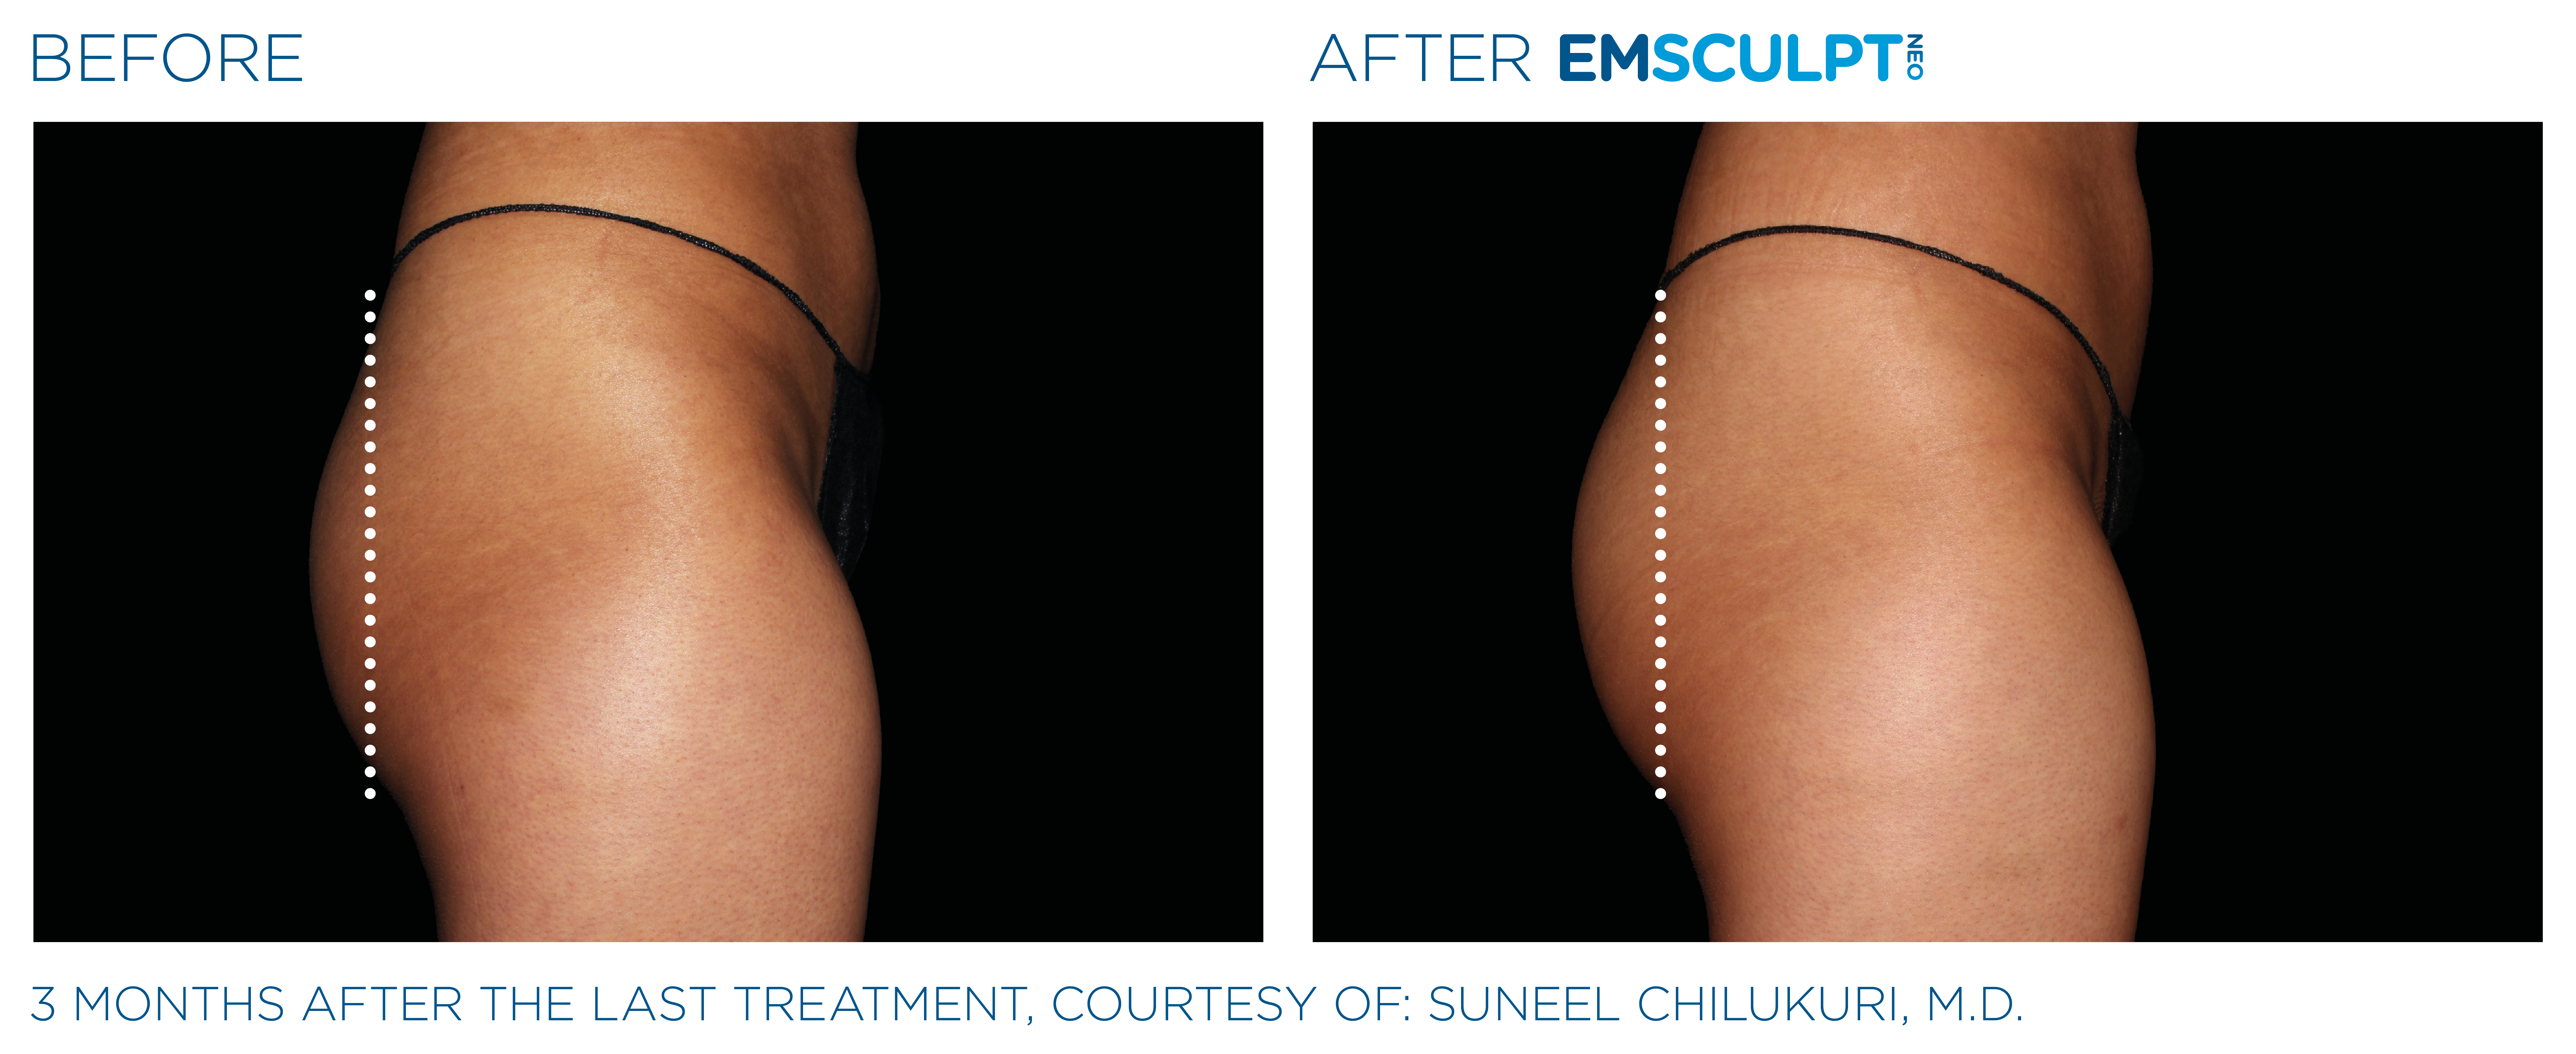 Emsculpt Neo Before and After Buttocks